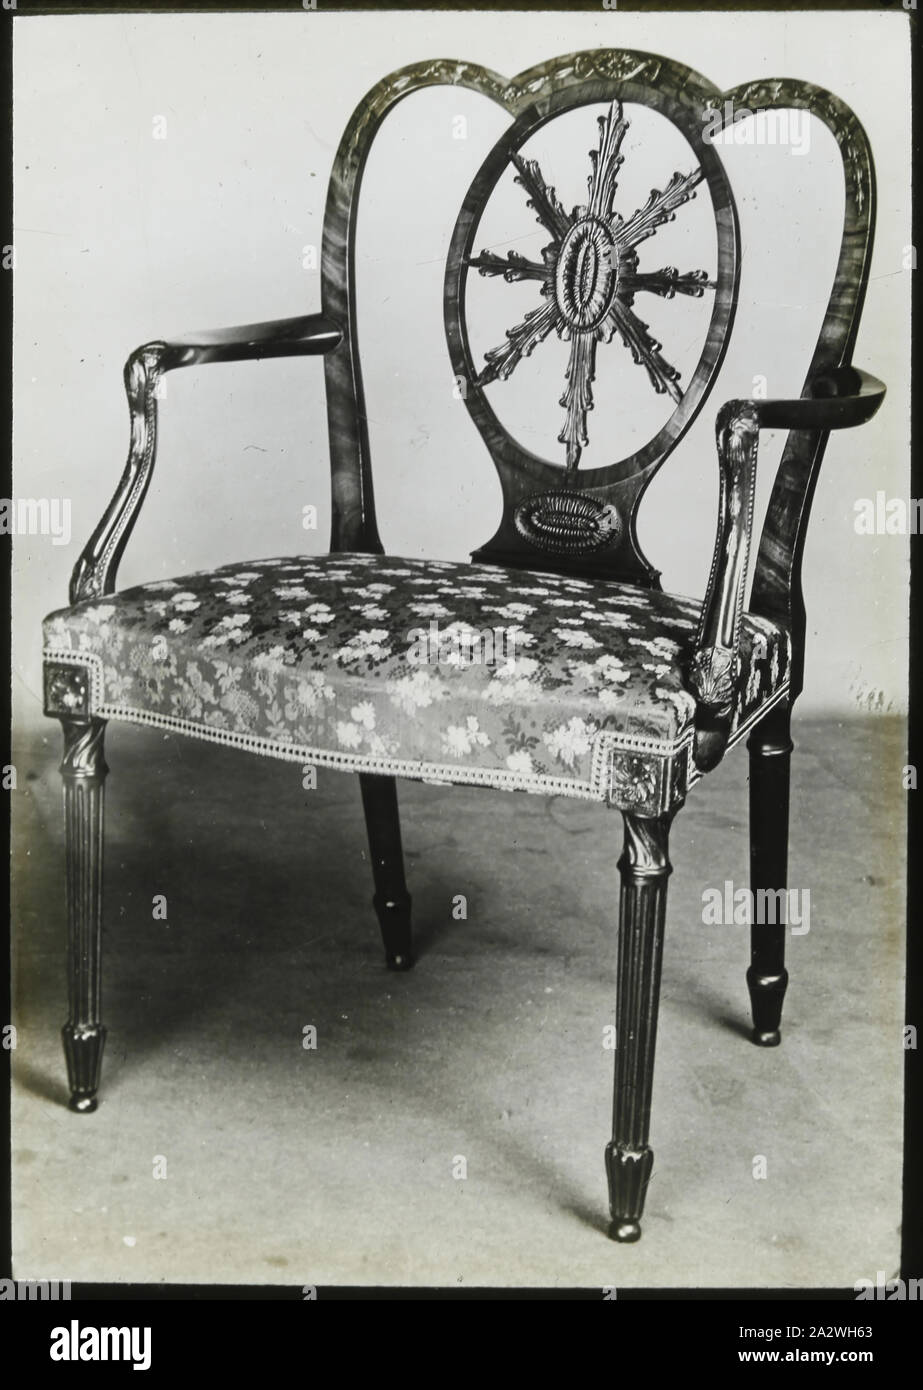 Lantern Slide - 'Adam Star Chair', 1909-1930, One of a set of ninety magic lantern slides containing images of artefacts, art works, decorative arts, interiors and furniture which appear to belong to various museum and gallery collections in the United Kingdom. The Francis Collection of pre-cinematic apparatus and ephemera was acquired by the Australian and Victorian Governments in 1975 Stock Photo